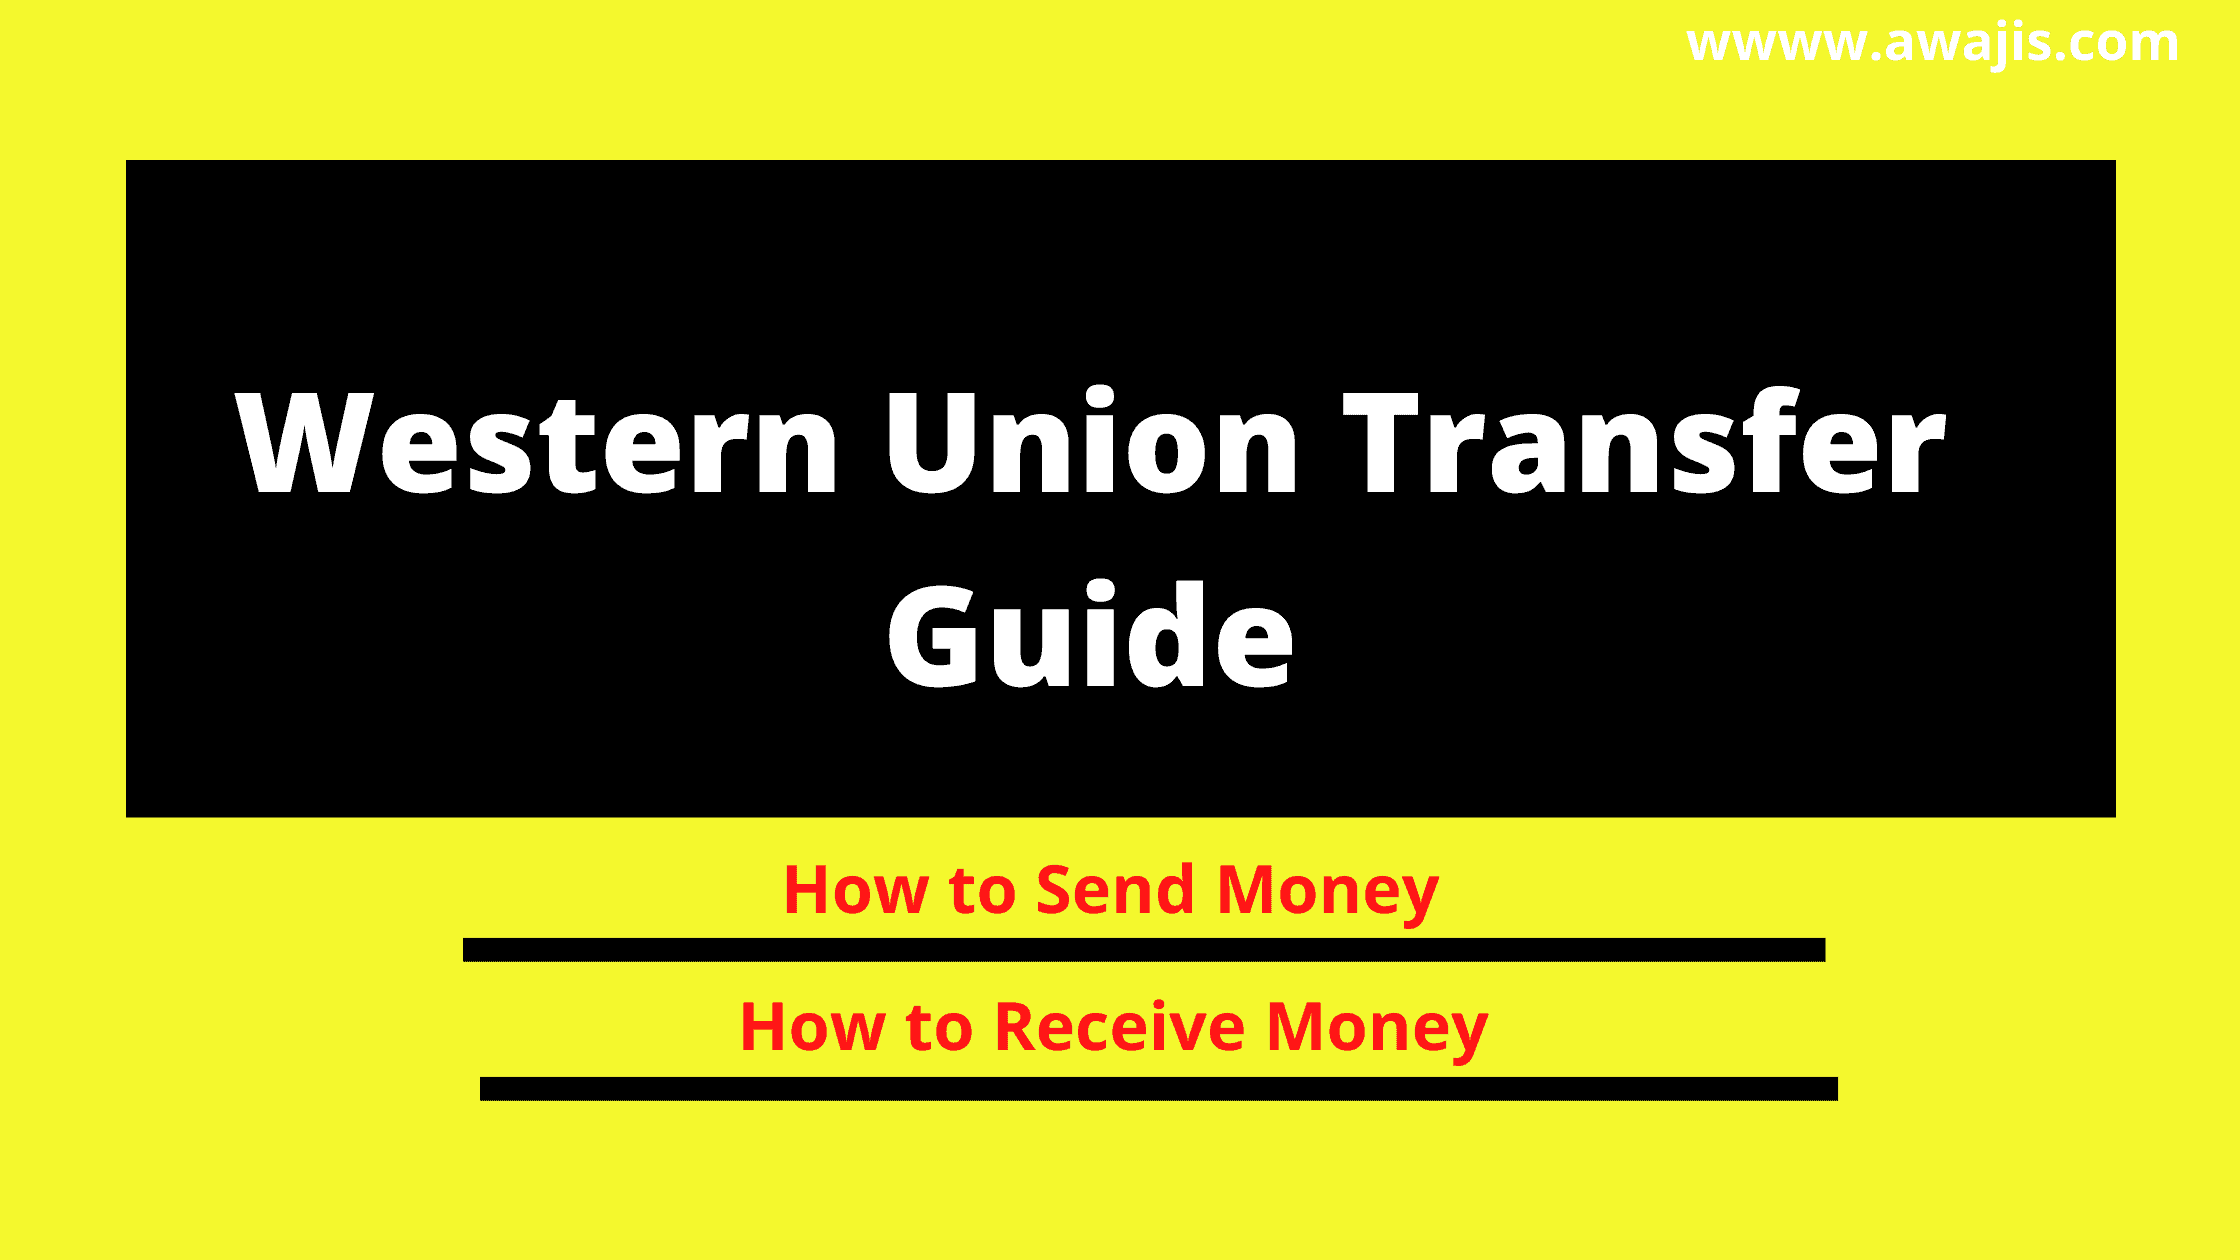 Western Union Transfer Guide | How to Send and Receive Money